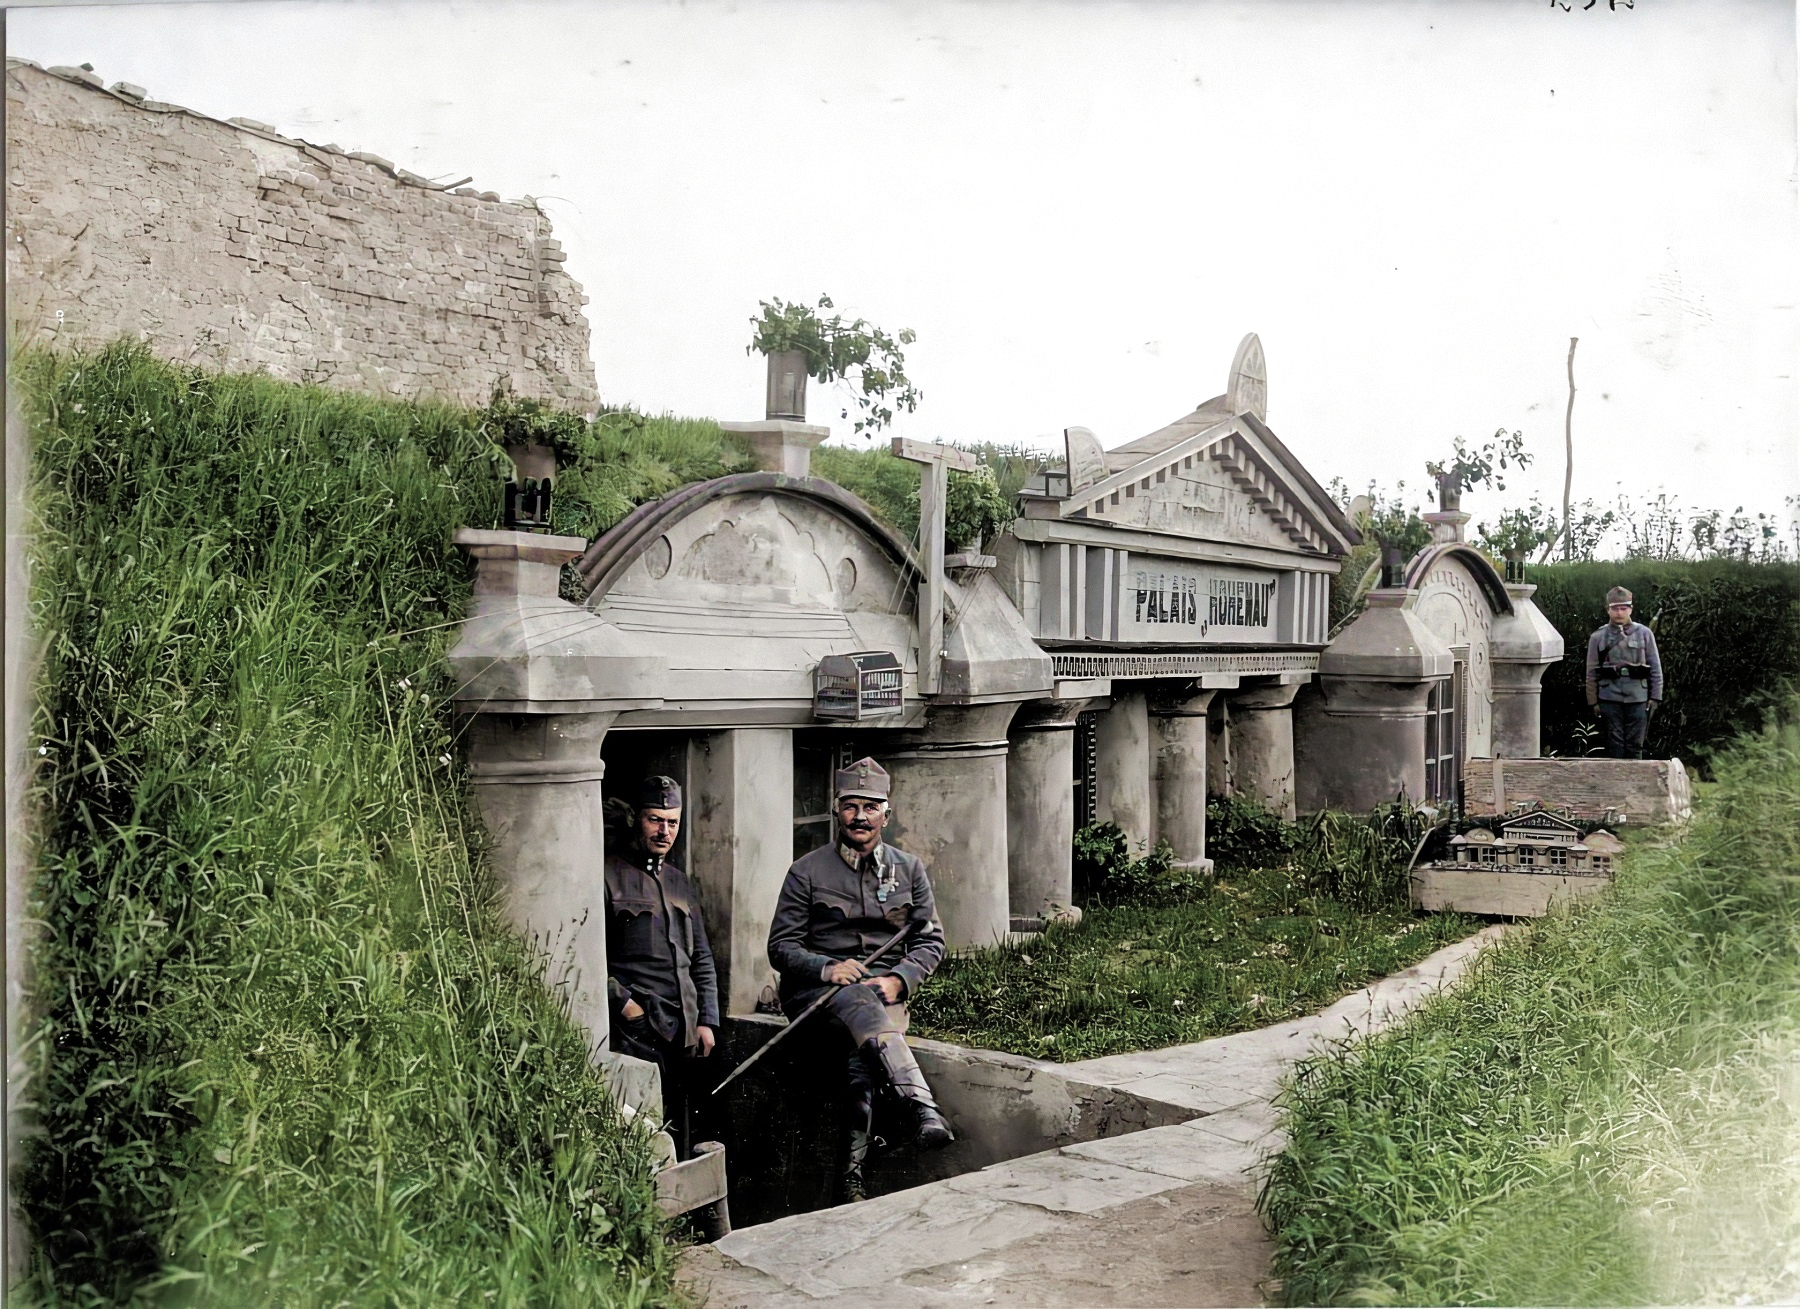 Little palace built in Austro-Hungarian trench near Lviv on Russian front during WW1, 1915 [Colorized].jpg